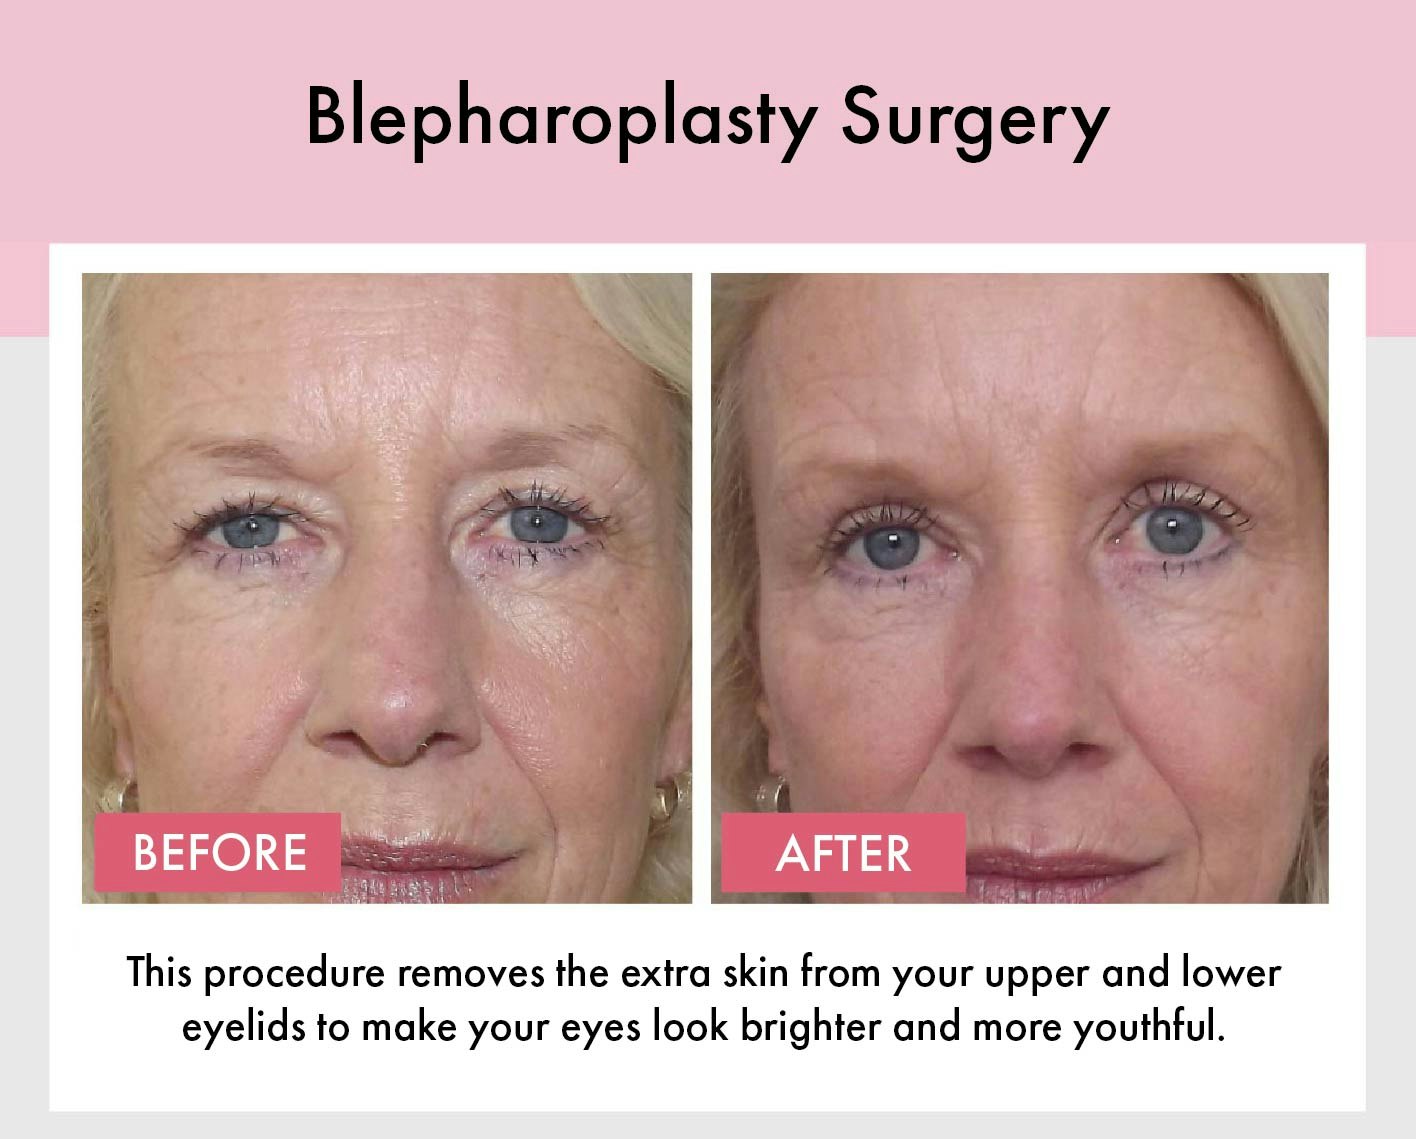 Patient blepharoplasty before and after image